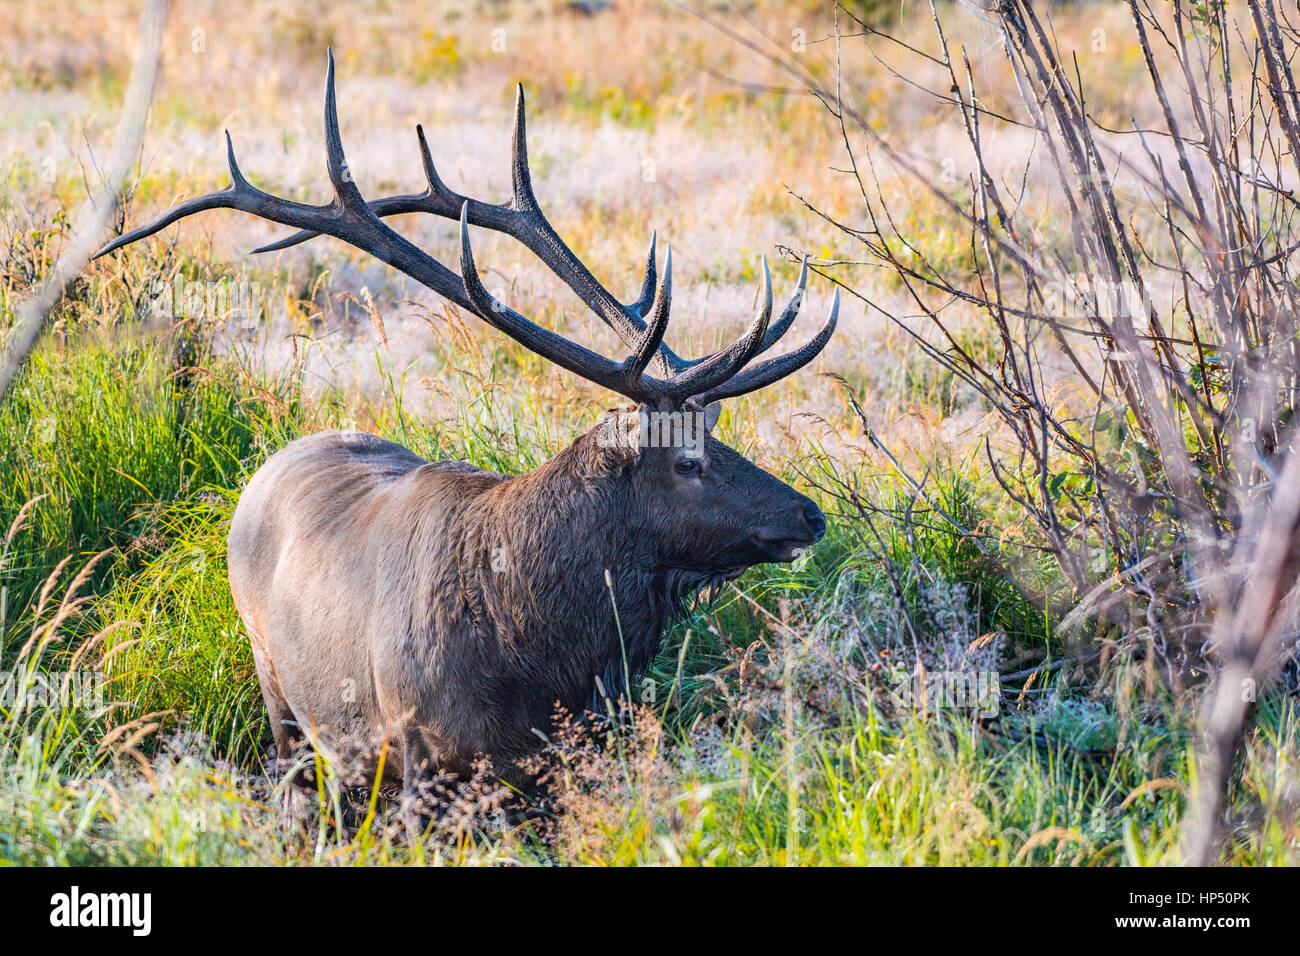 A Large Bull Elk in a Mountain Meadow Stock Photo